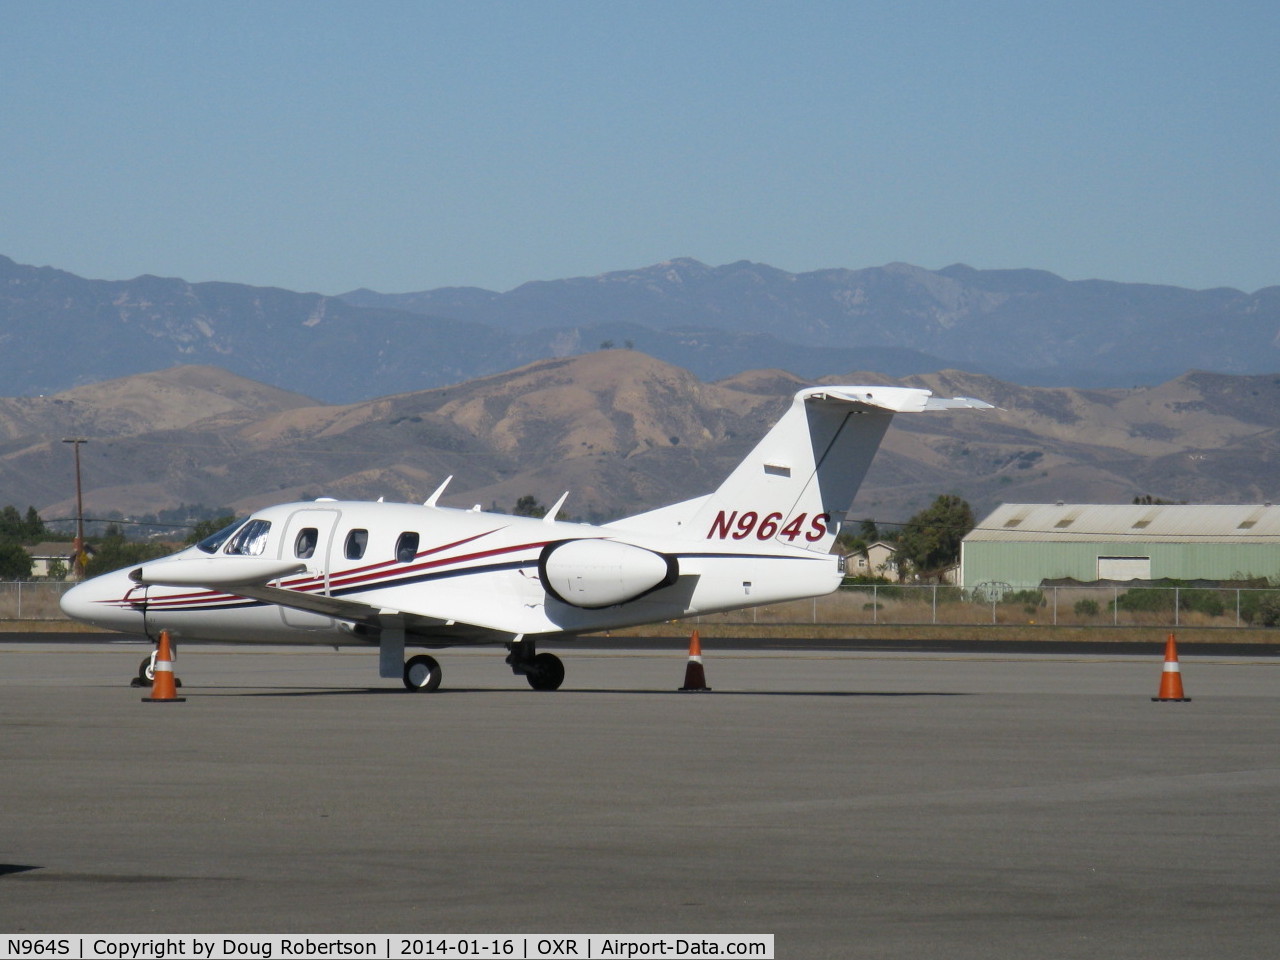 N964S, 2008 Eclipse Aviation Corp EA500 C/N 000132, 2008 Eclipse Aviation EA500 VLJ, two P&W(C)PW610F-A Turbofans 900 lb st each